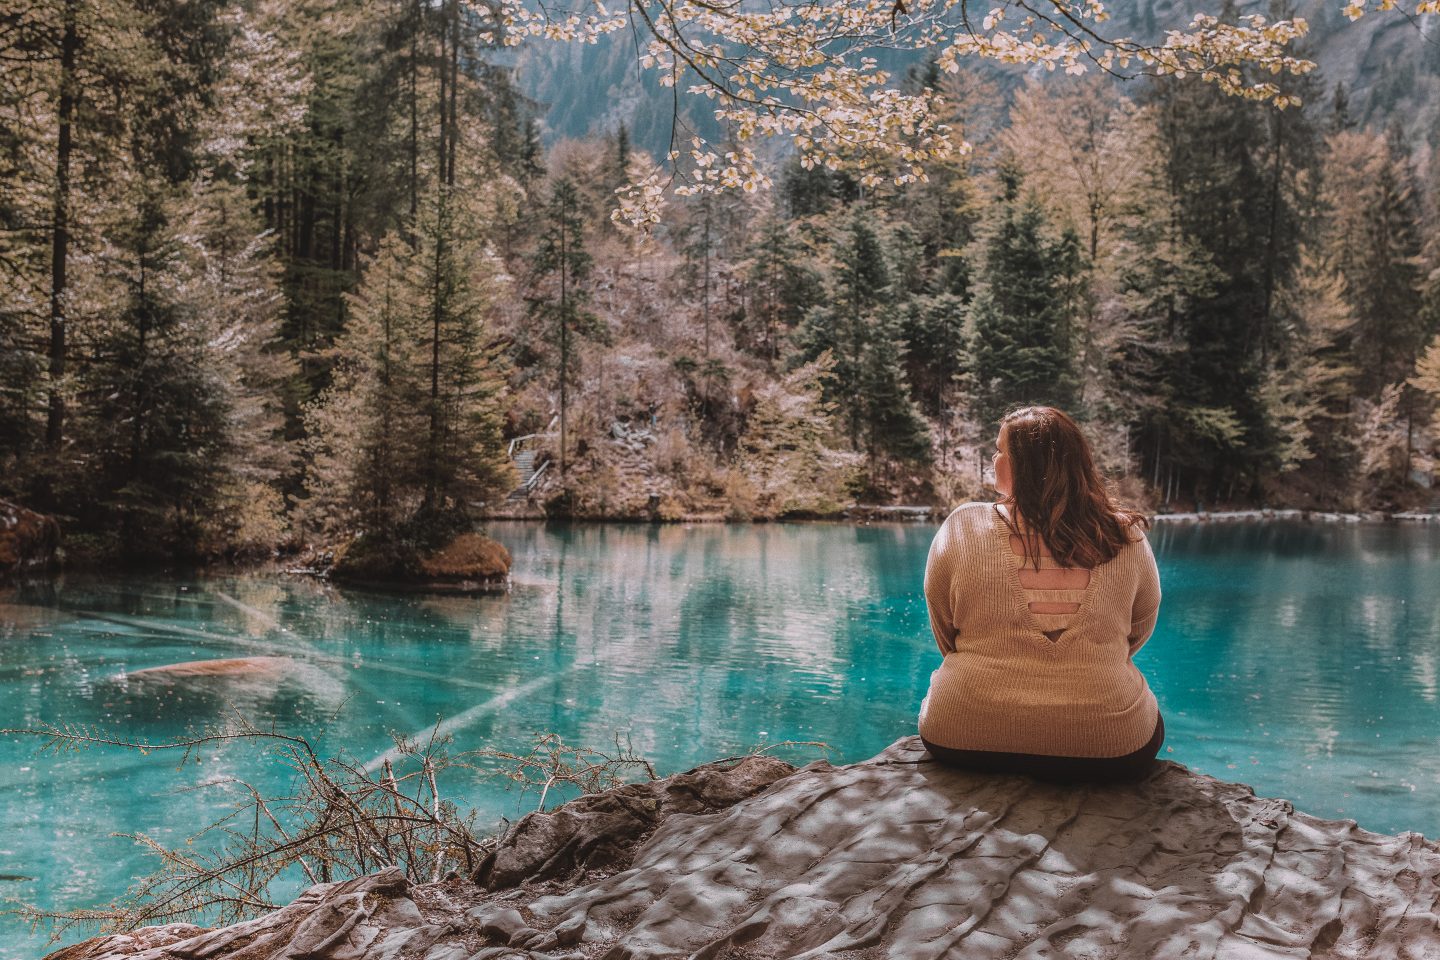 Sitting and basking in the crystal clear waters of Lake Blausee, Switzerland